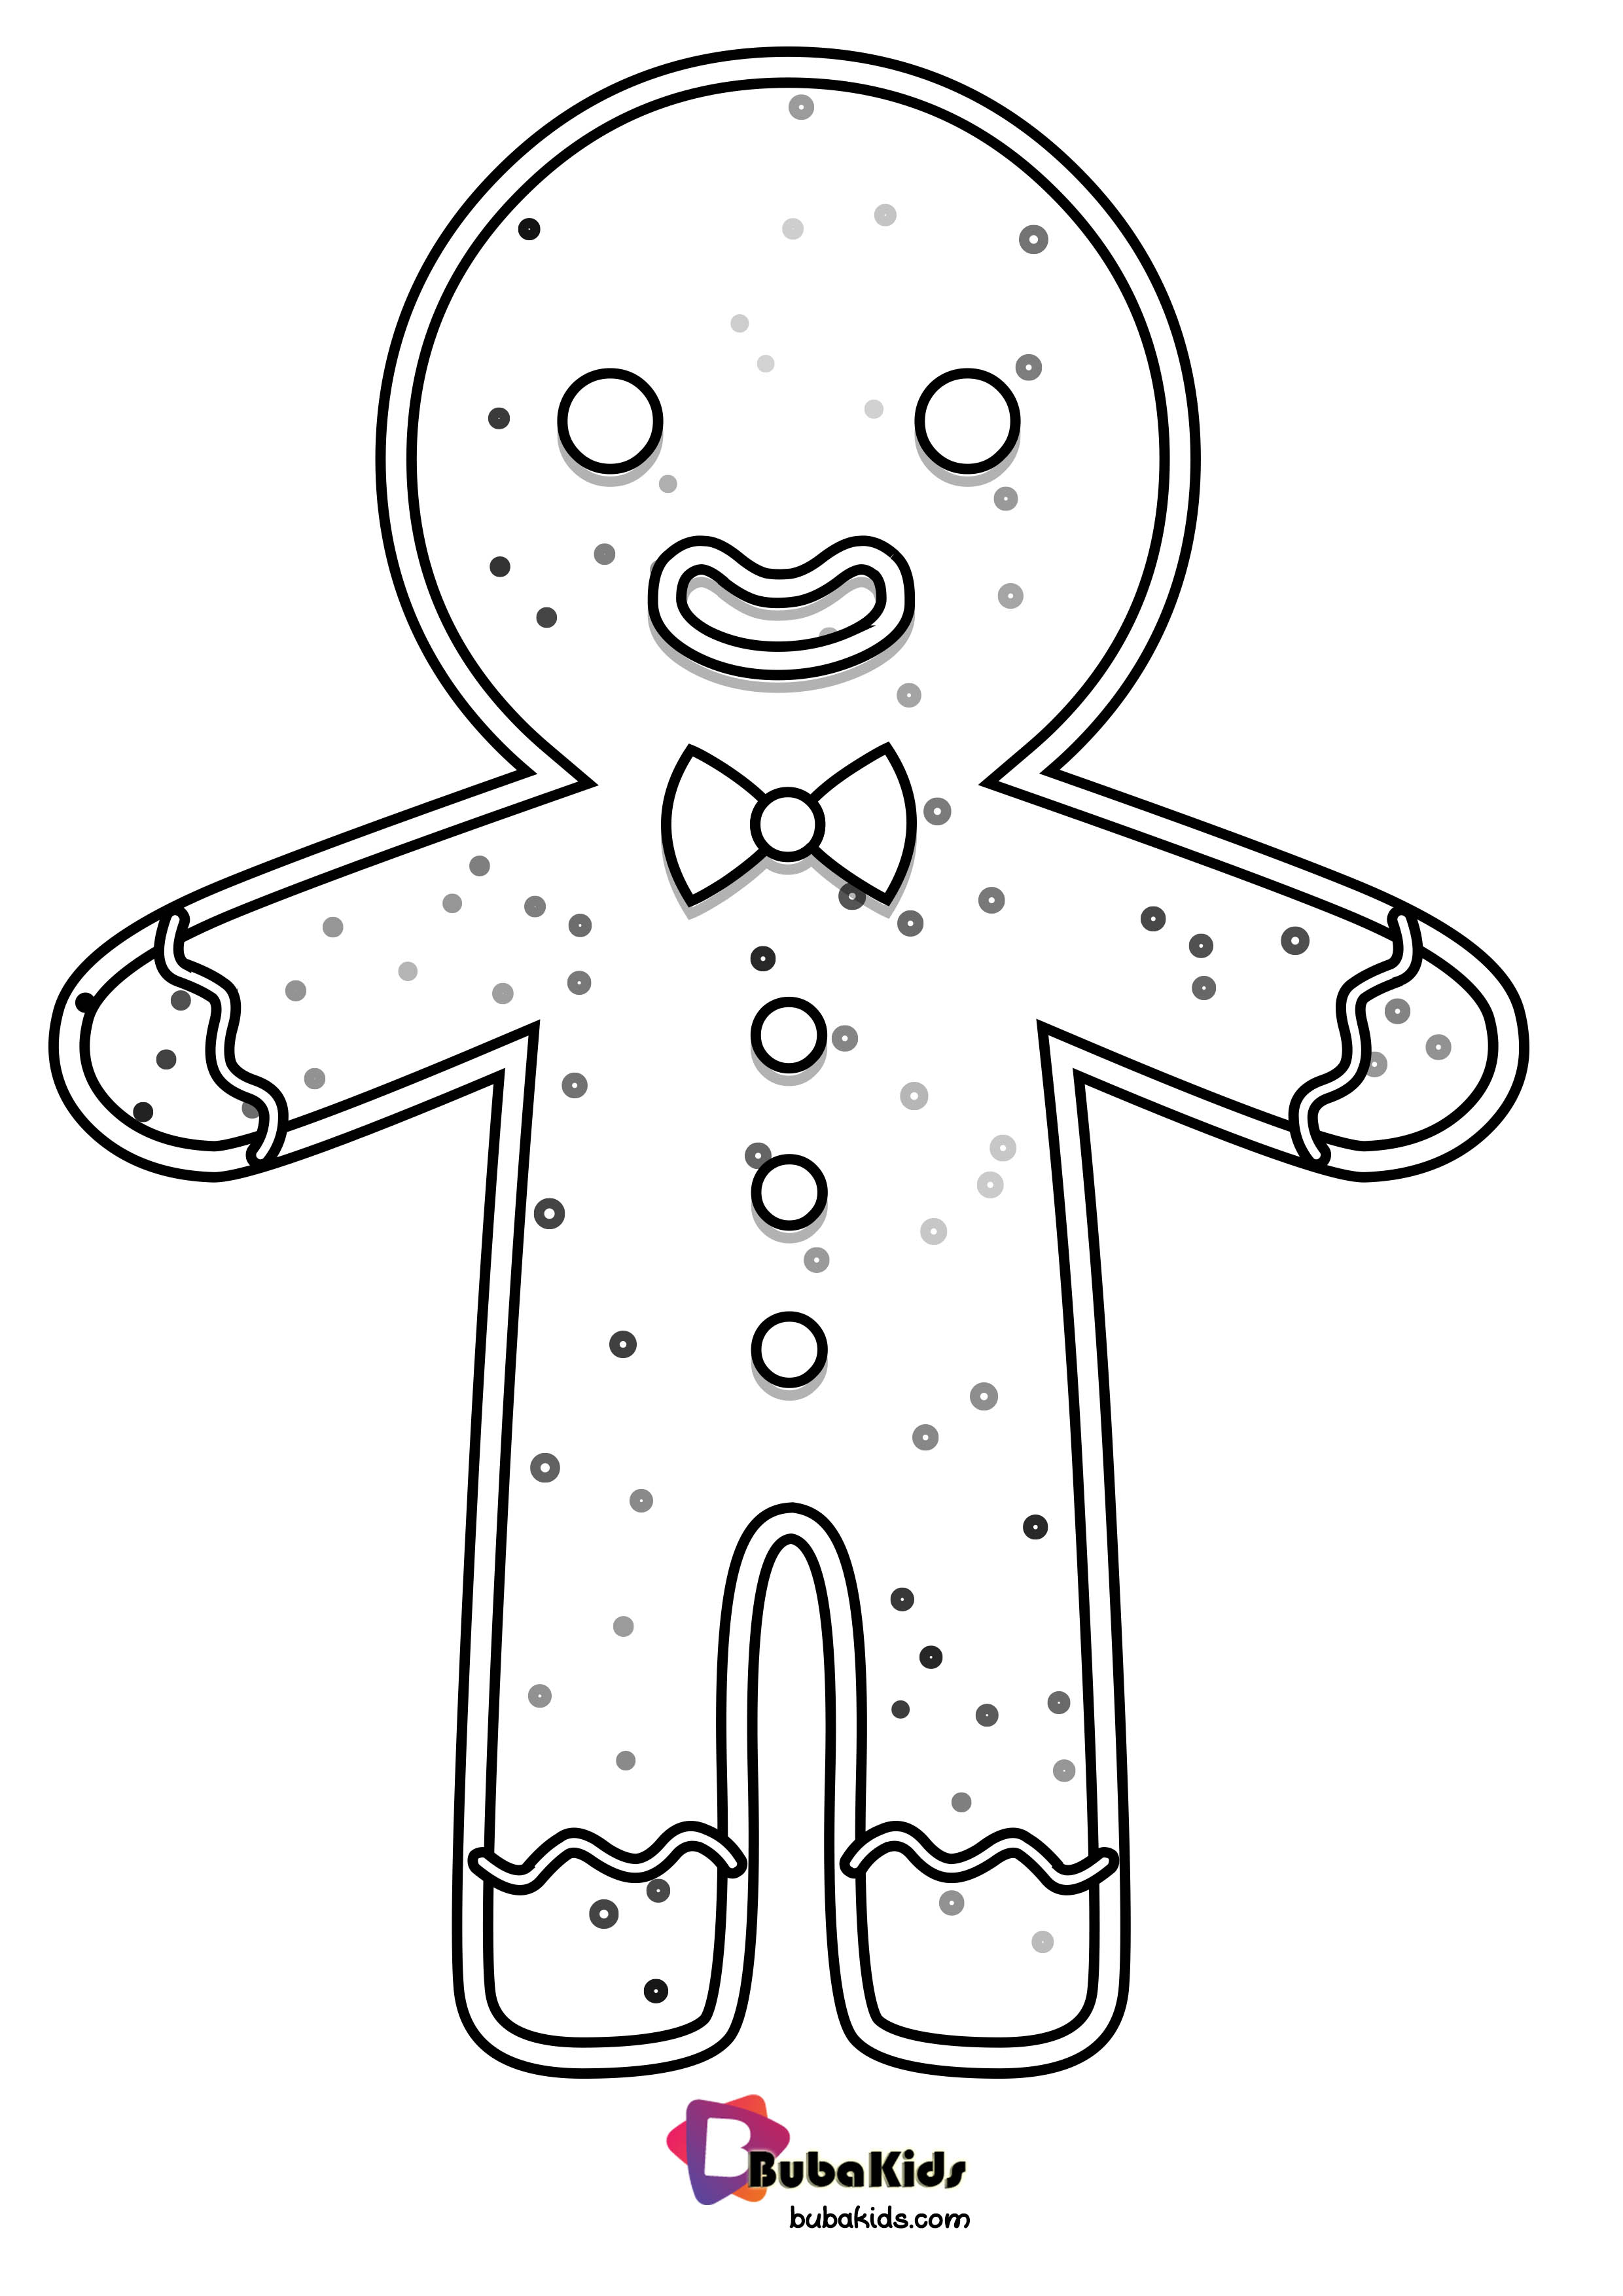 Gingerbread Man Coloring Page - BubaKids.com